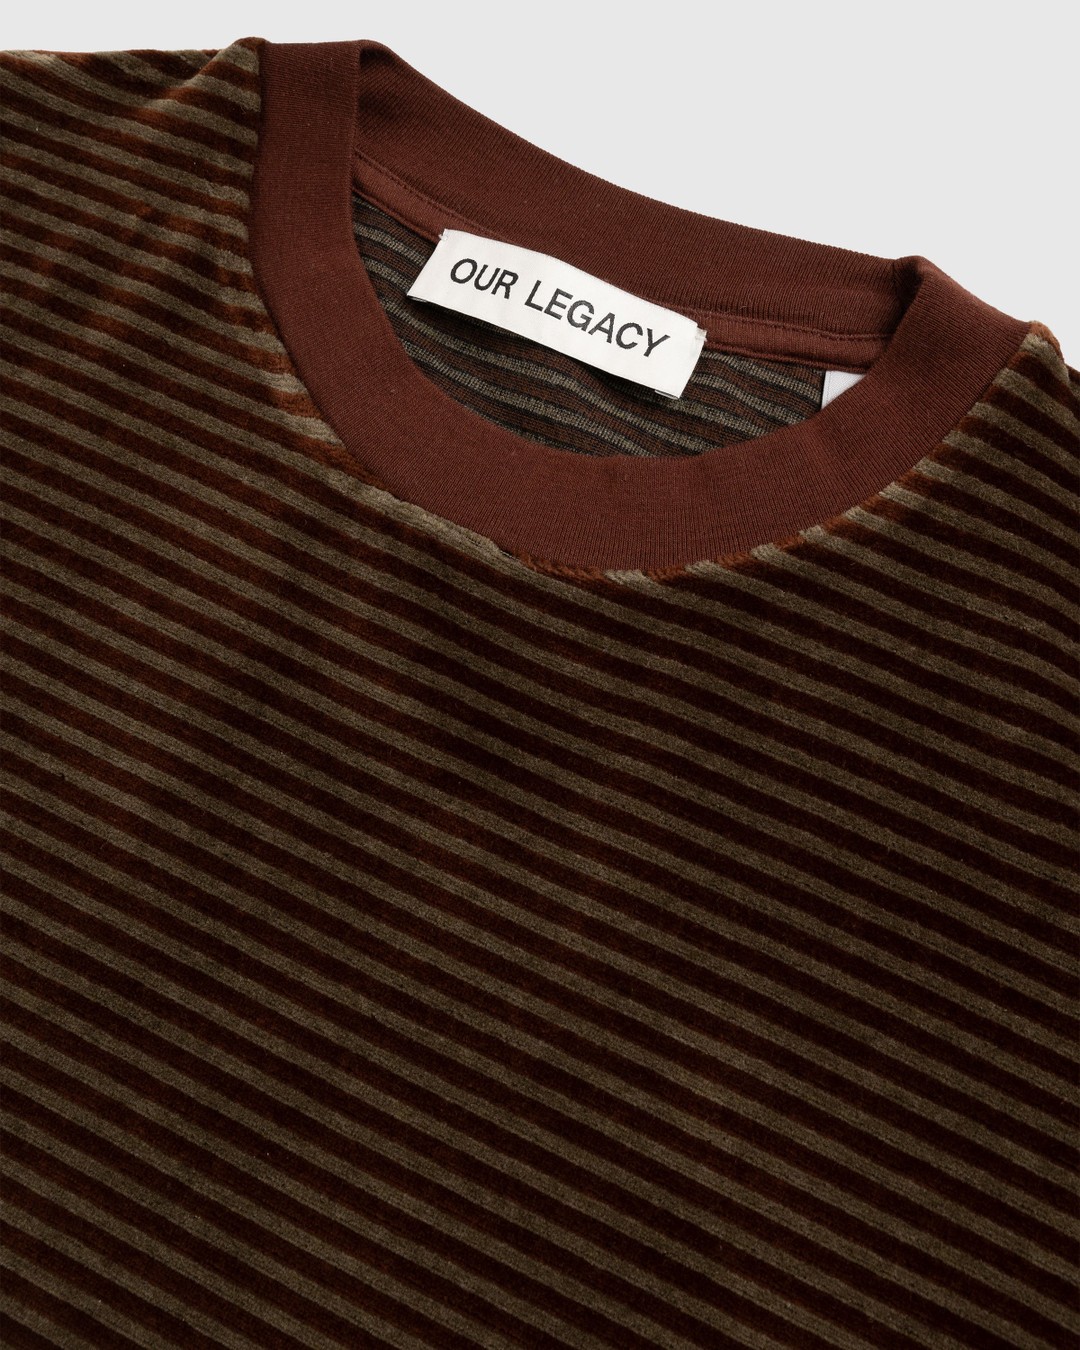 Our Legacy – Hover T-Shirt Brown - T-shirts - Brown - Image 6